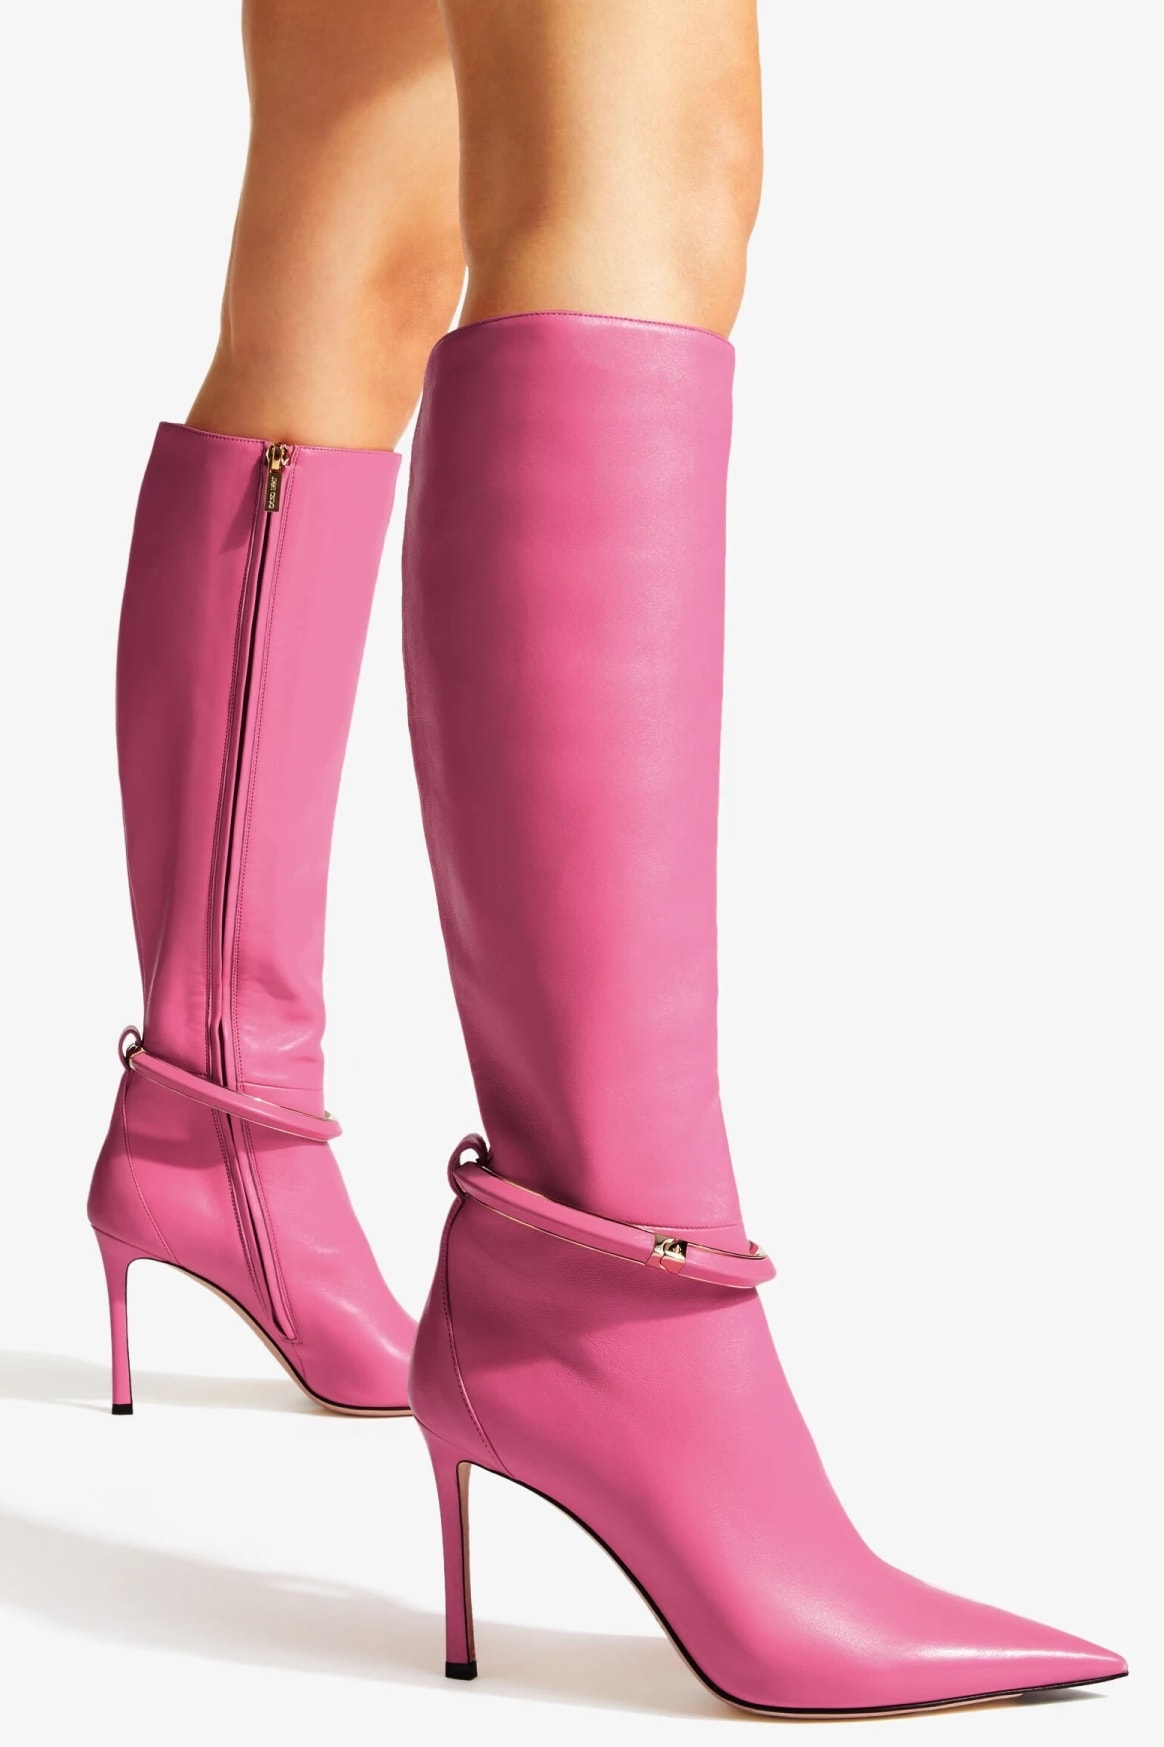 These candy pink boots are embellished with a gold-tone metal and leather cuff bracelet